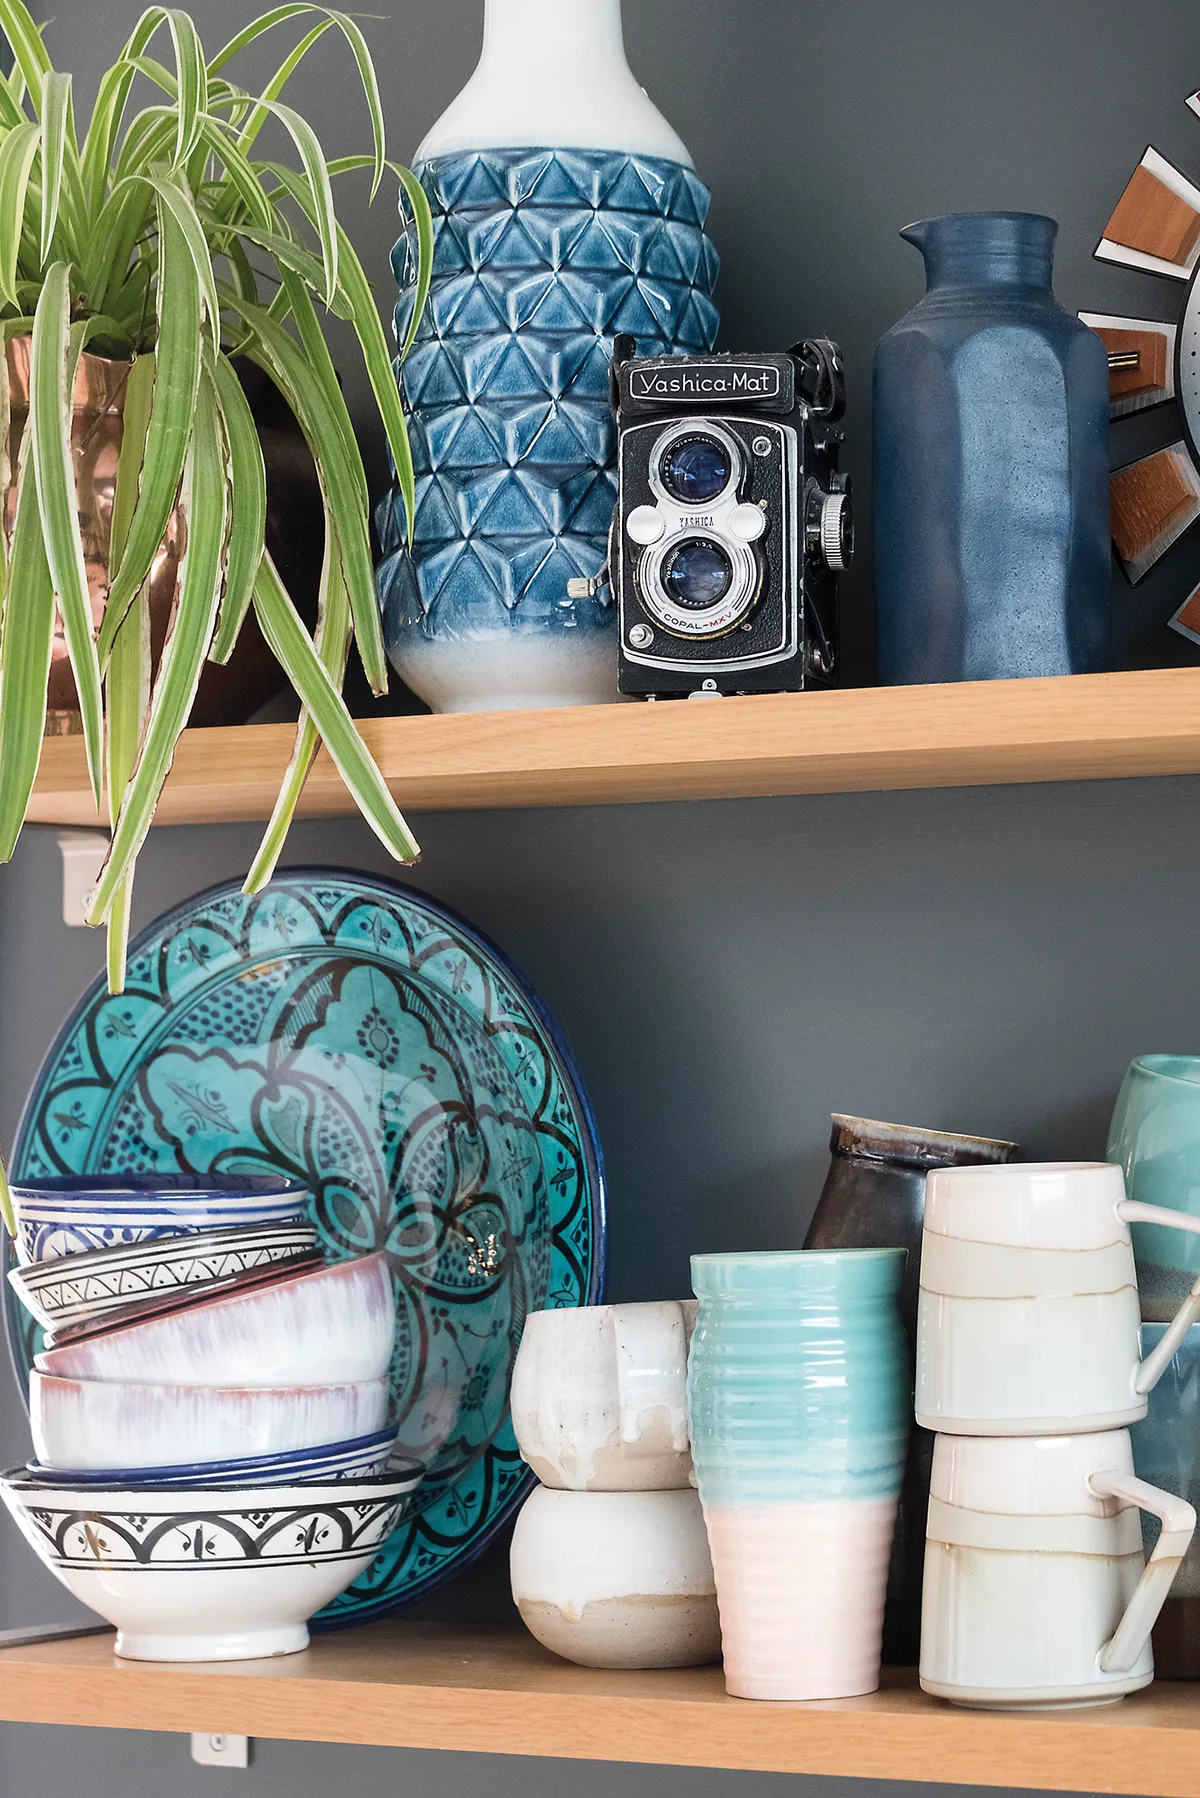 The kitchen shelves show off a characterful china collection alongside one of Sophie’s late father’s old cameras. ‘There’s pottery by local craftspeople, pieces from holidays abroad and even budget bits from TK Maxx, and most of it gets used every day,’ she says